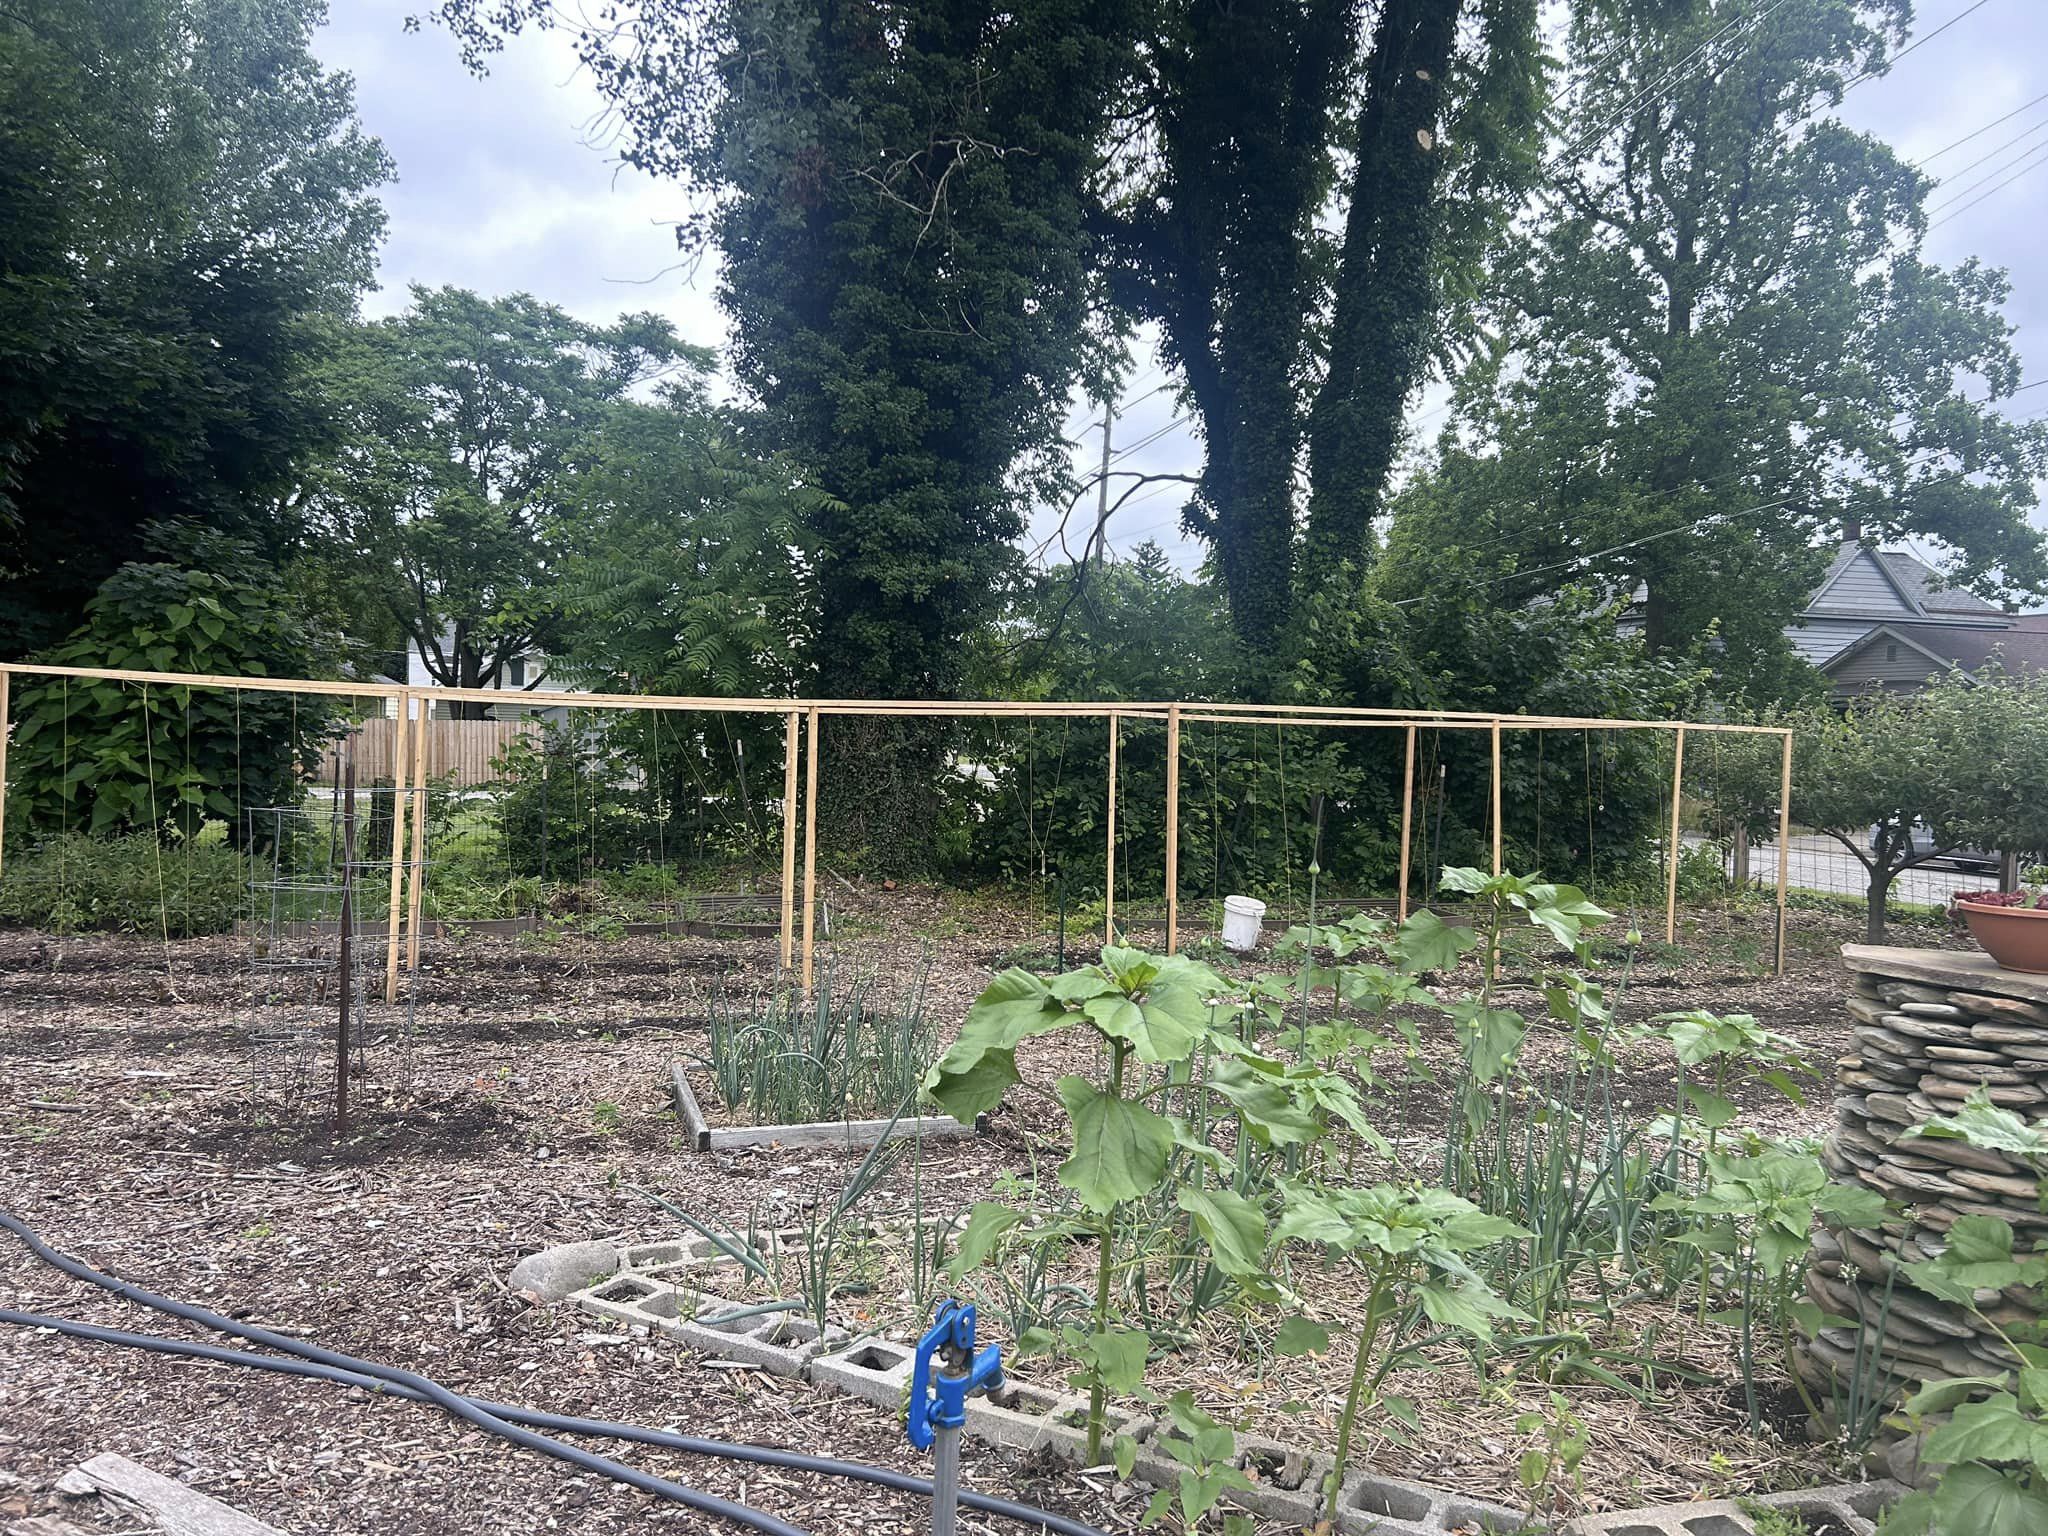 Community Members Step Up After Urban Farm Vandalized